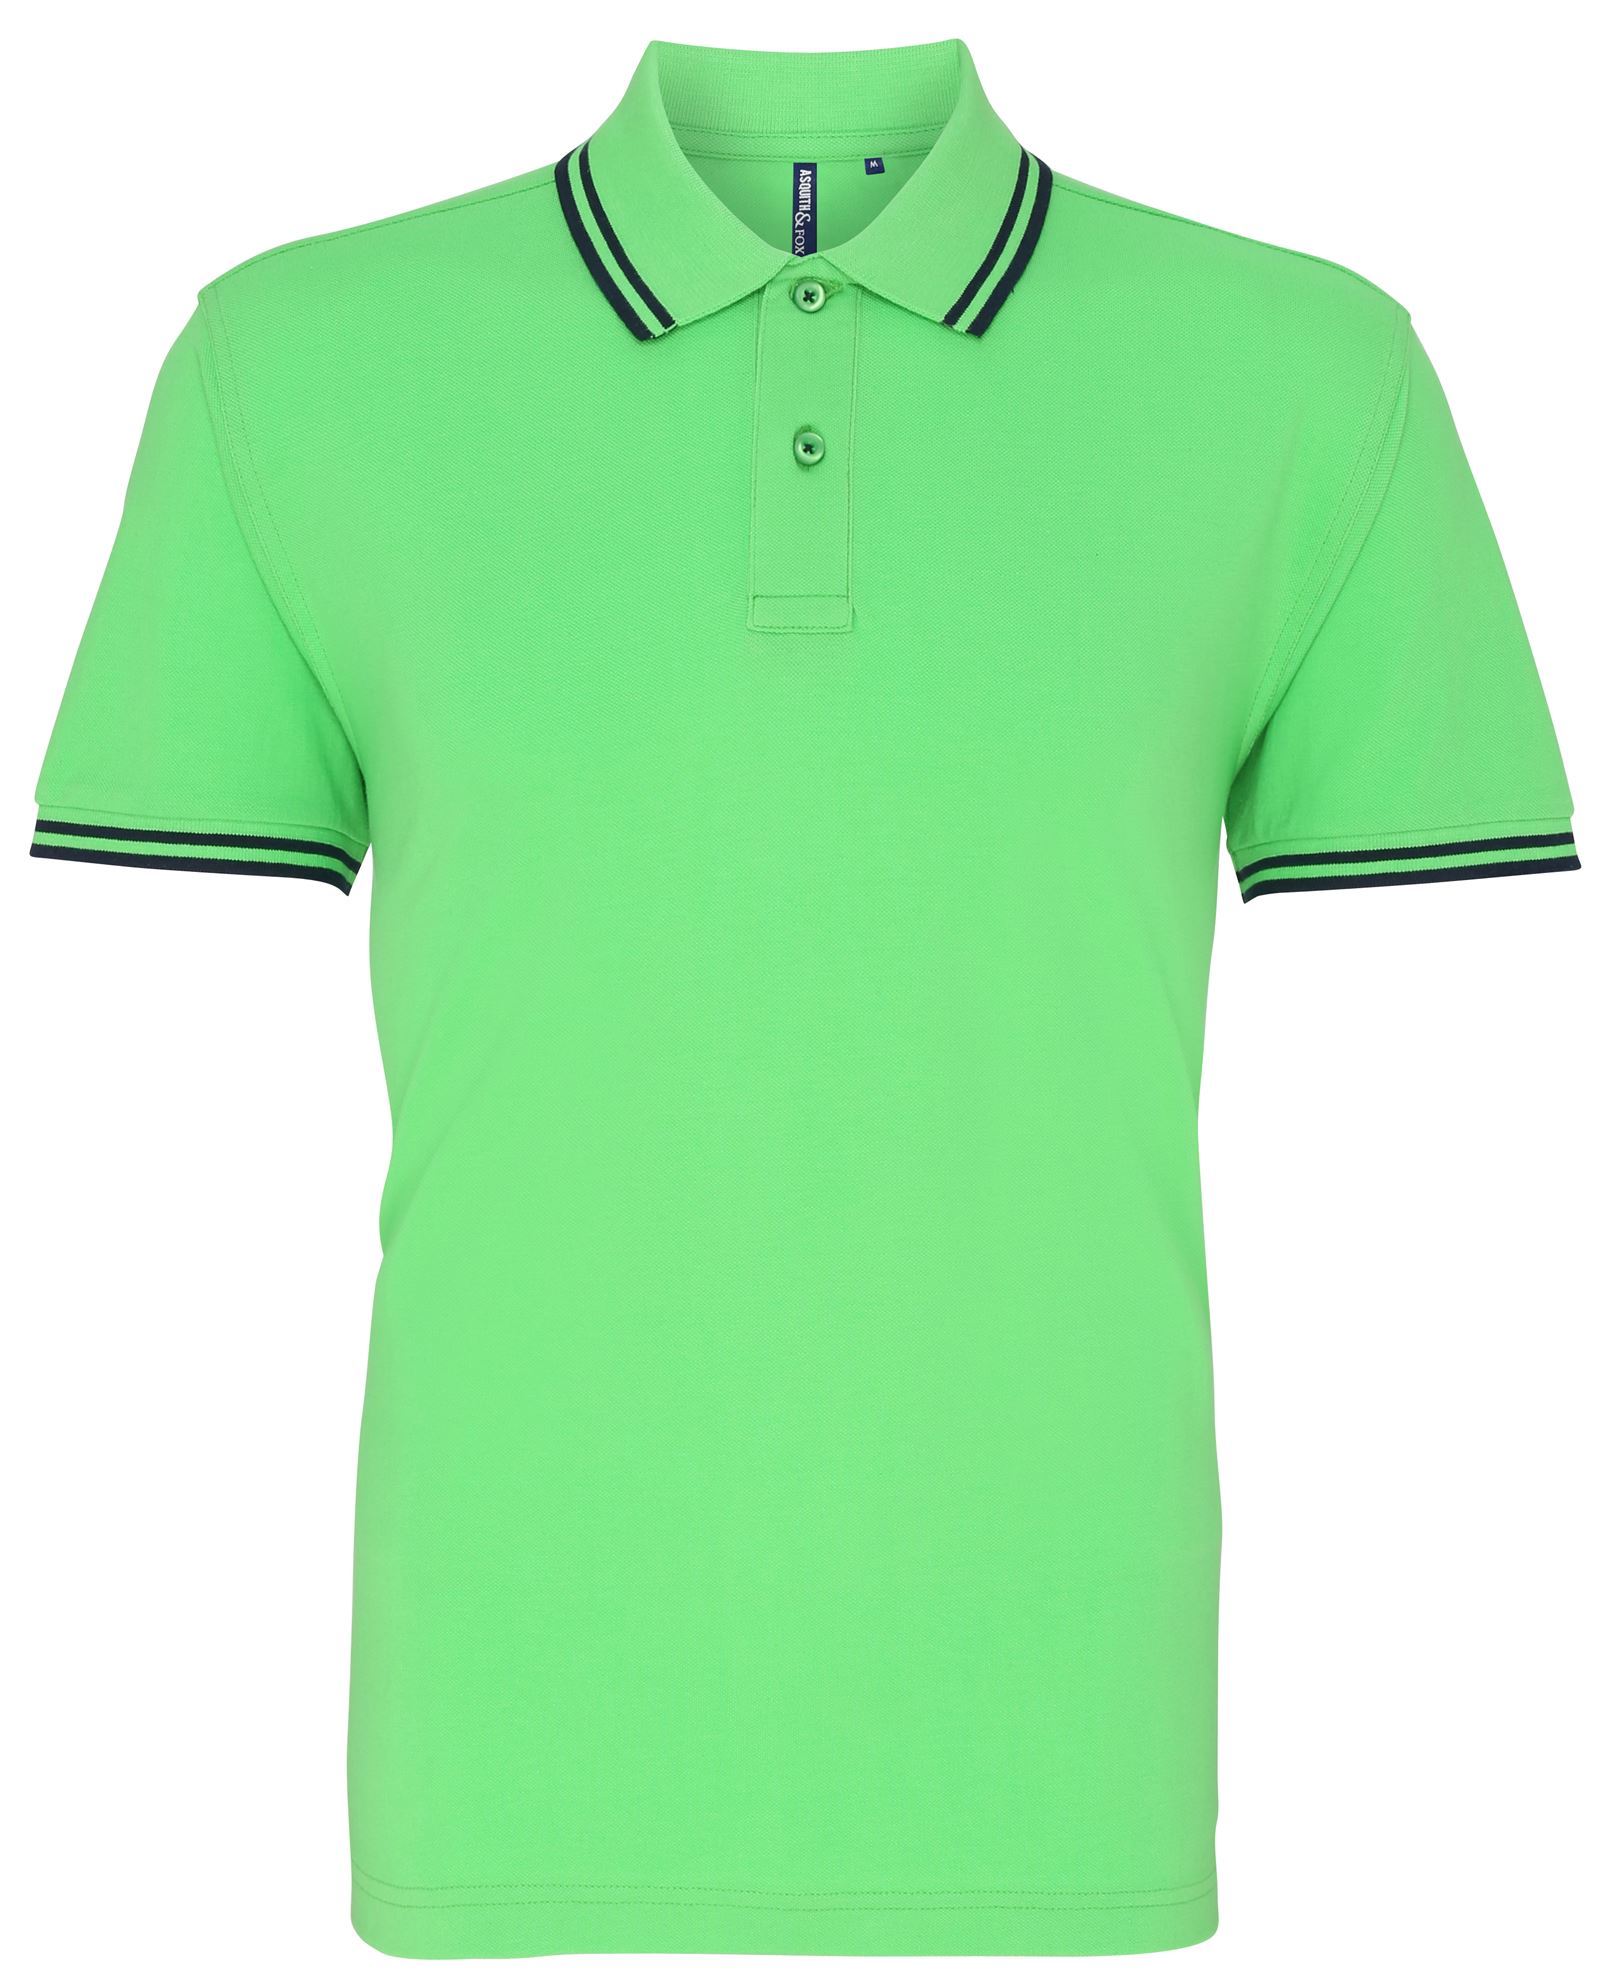 Men's Classic Fit Tipped Polo Shirt - United Workwear